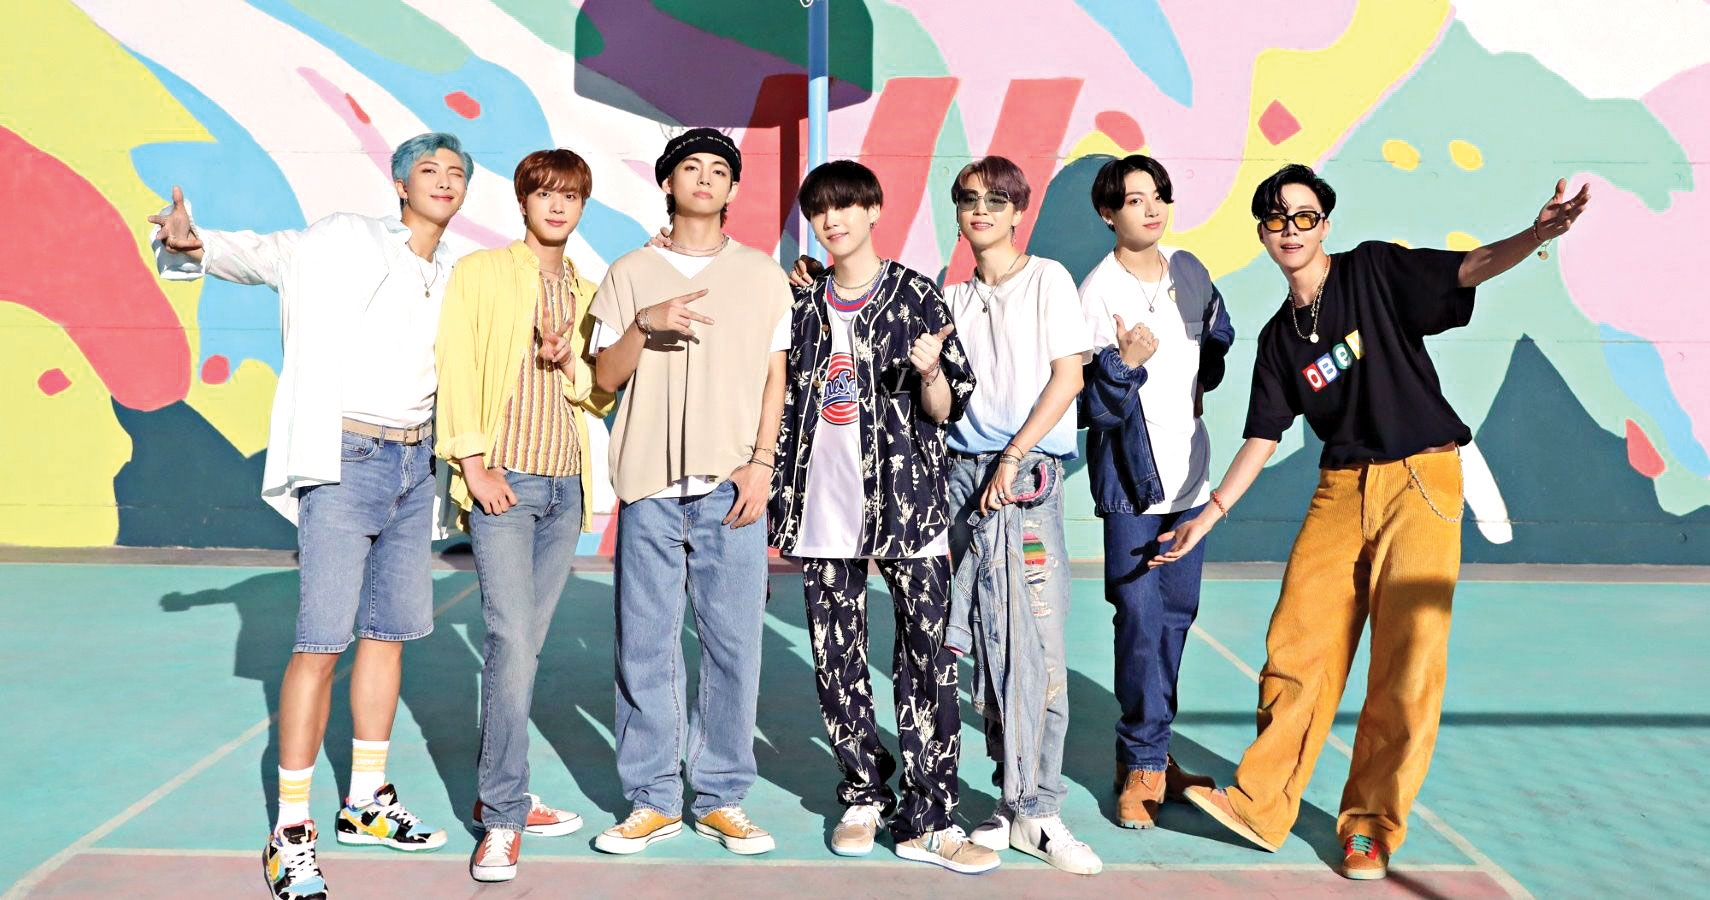 BTS to debut new music video in Fortnite